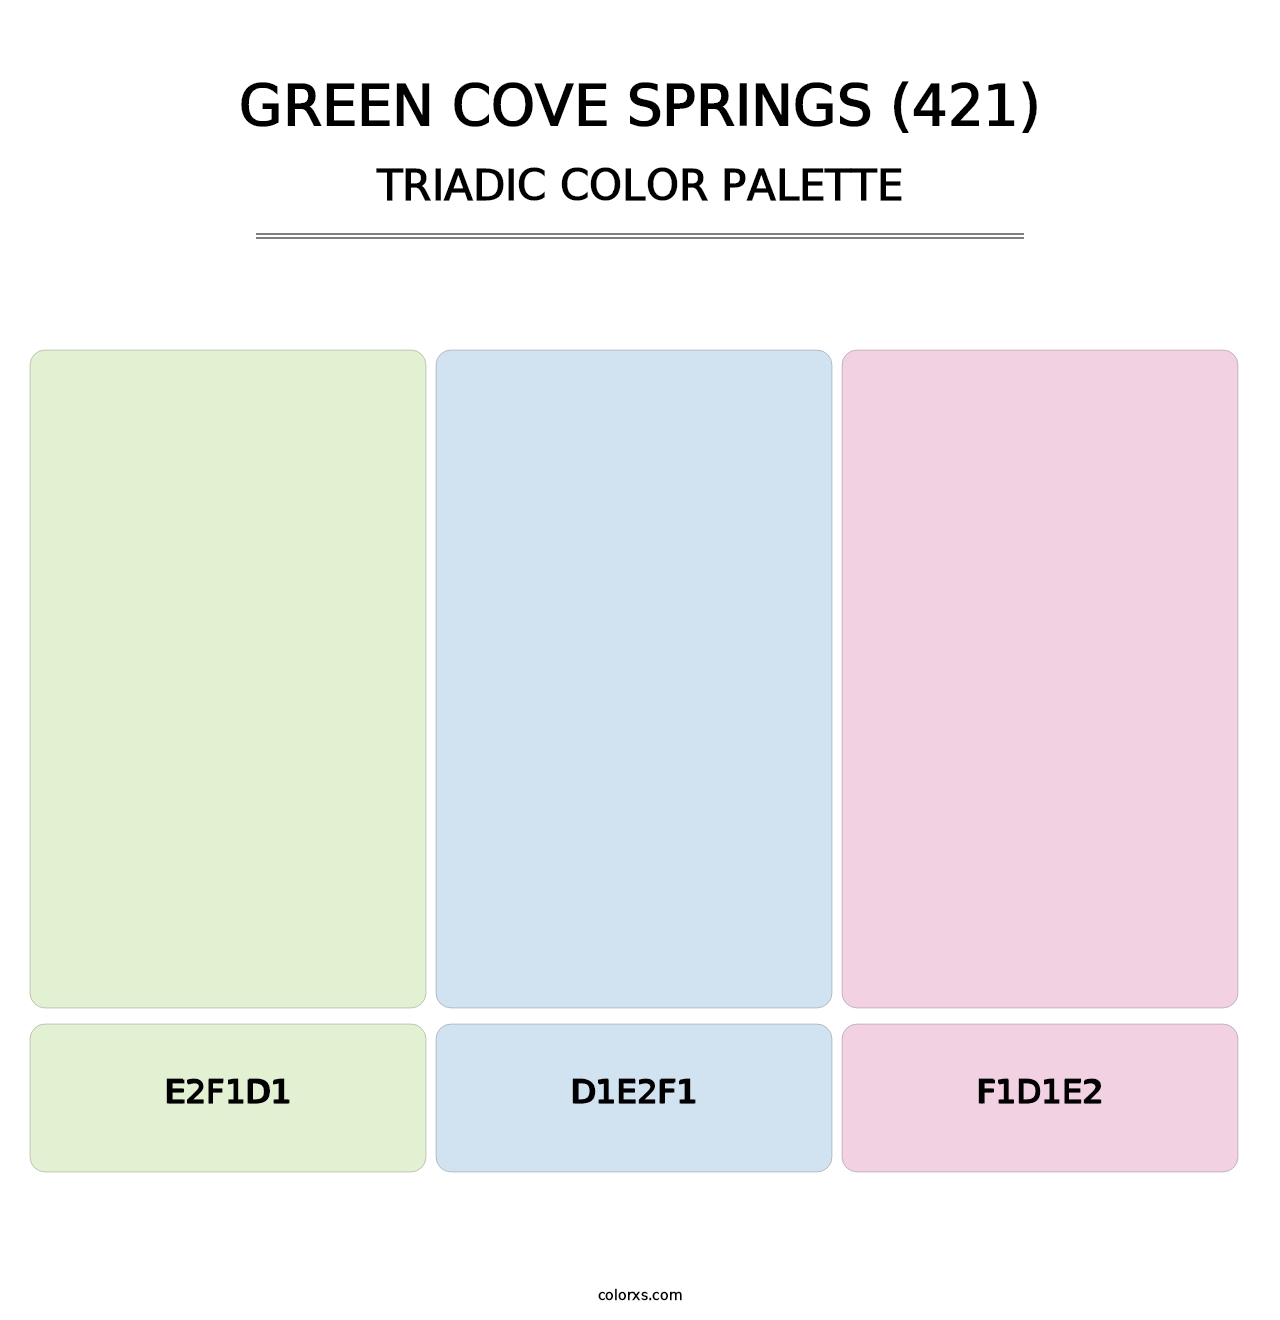 Green Cove Springs (421) - Triadic Color Palette